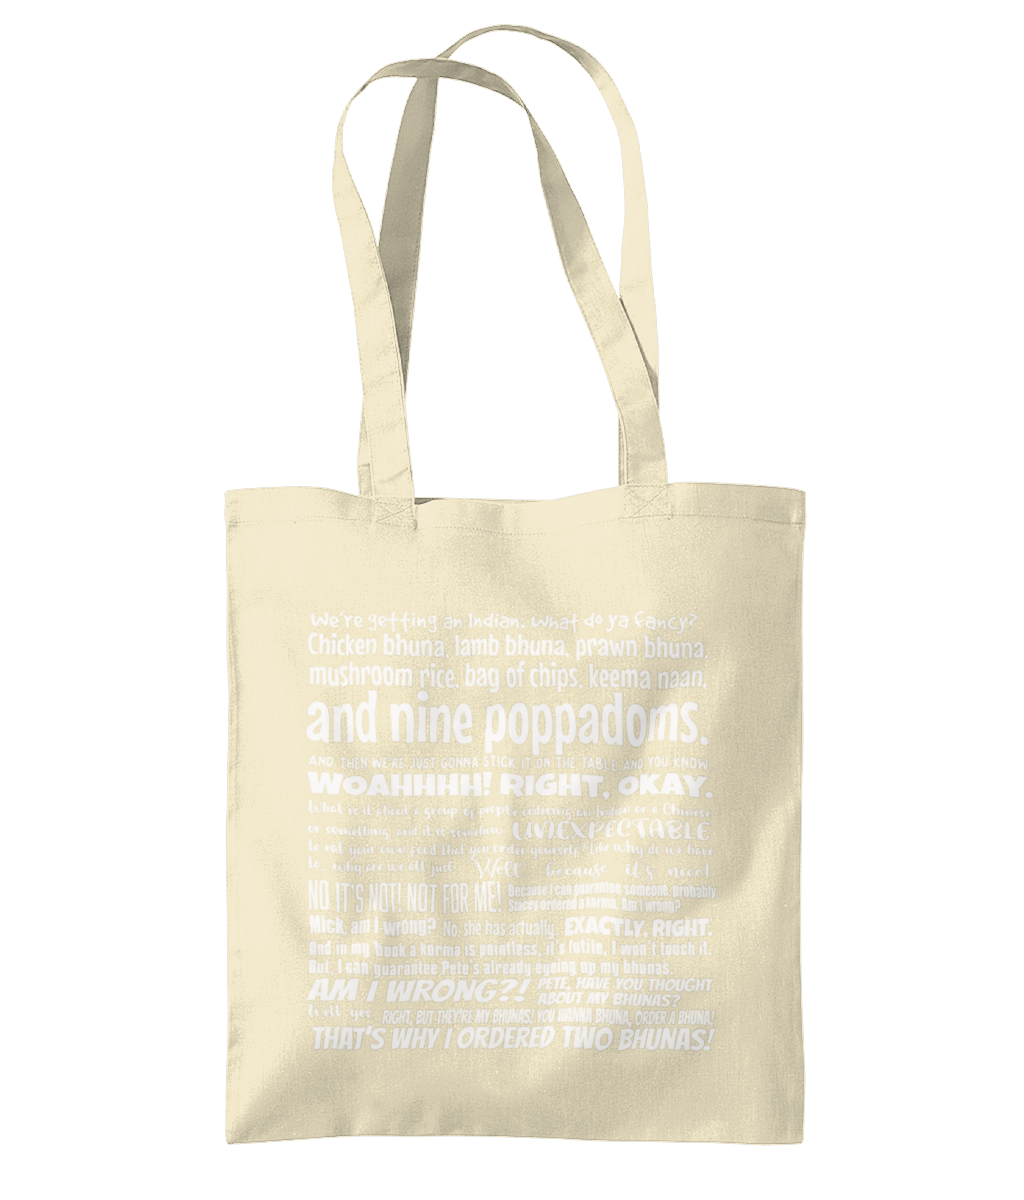 Smithy's Indian Order Tote Bag